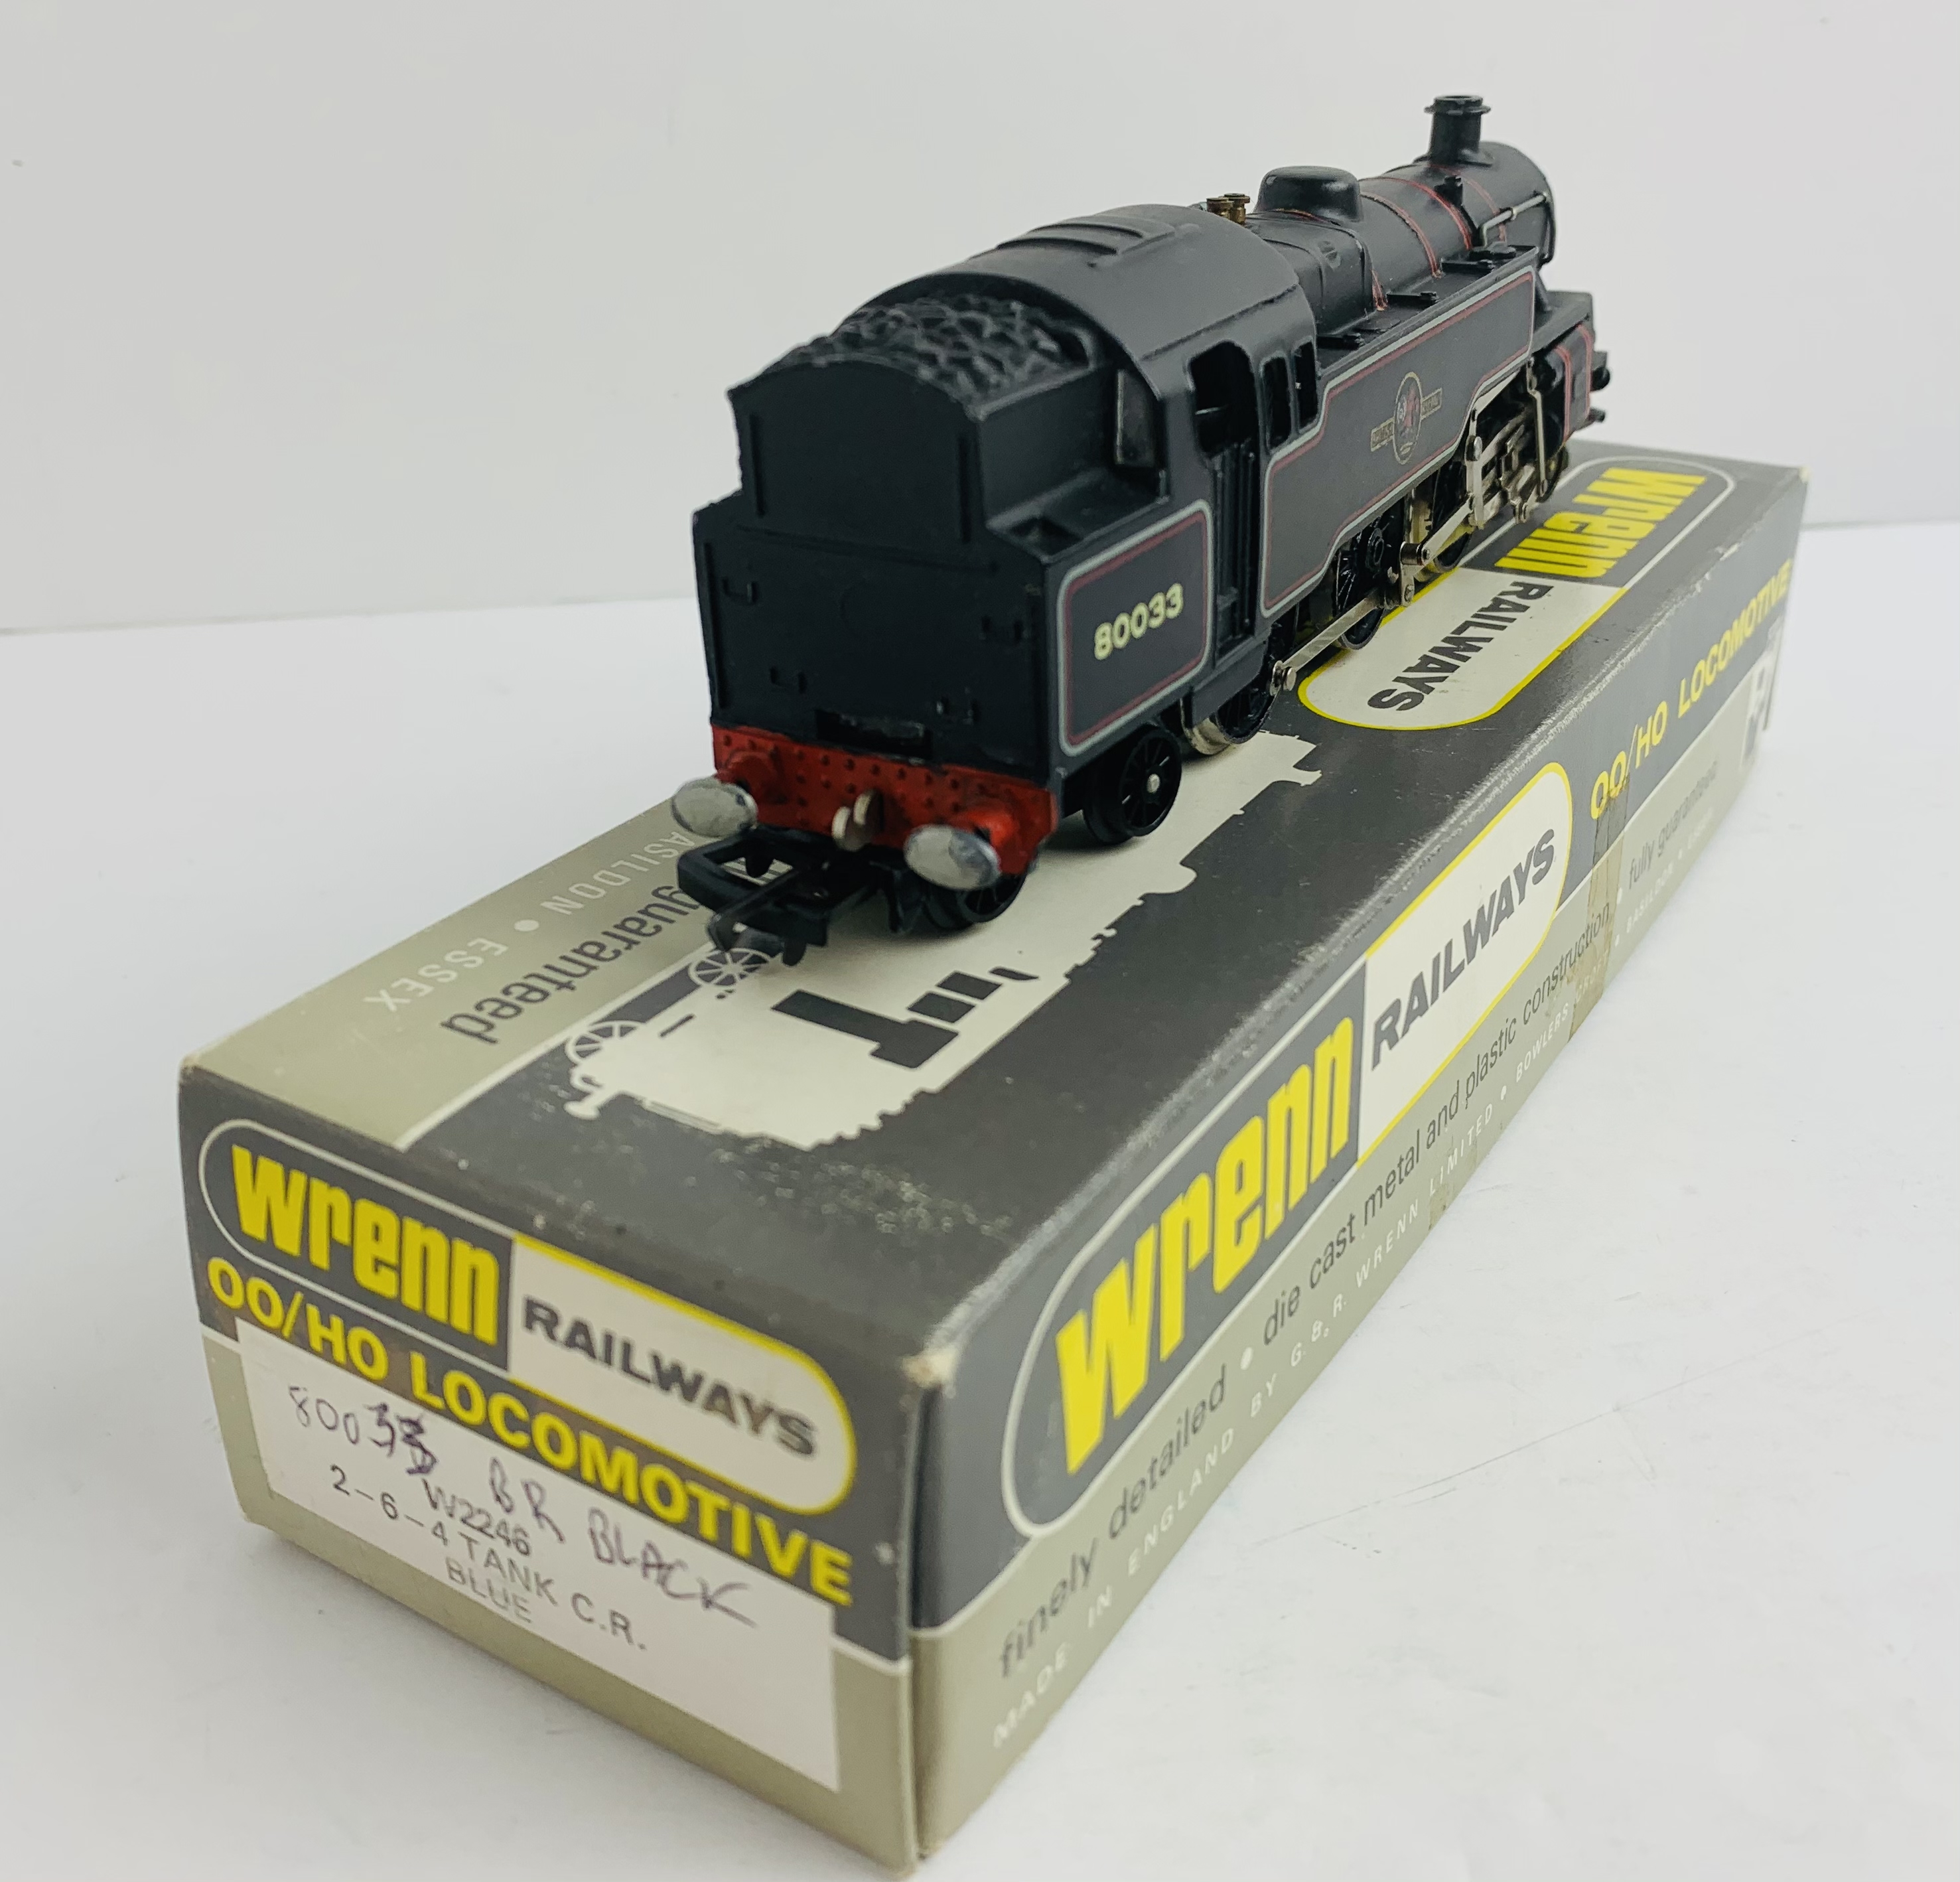 Wrenn BR 2-6-4 Tank - Incorrect Box - W2248 Box. P&P Group 1 (£14+VAT for the first lot and £1+VAT - Image 4 of 4